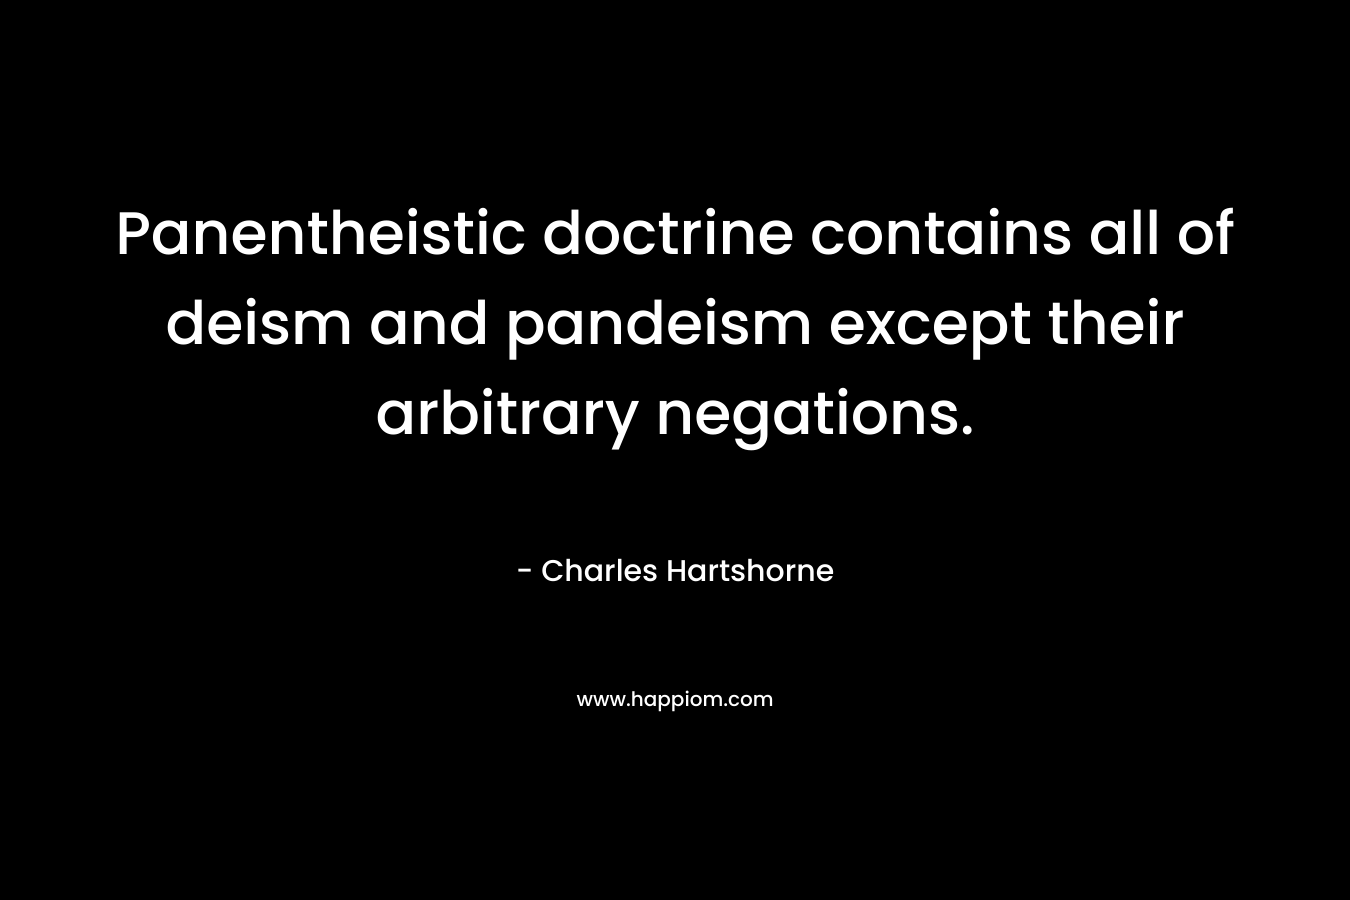 Panentheistic doctrine contains all of deism and pandeism except their arbitrary negations. – Charles Hartshorne